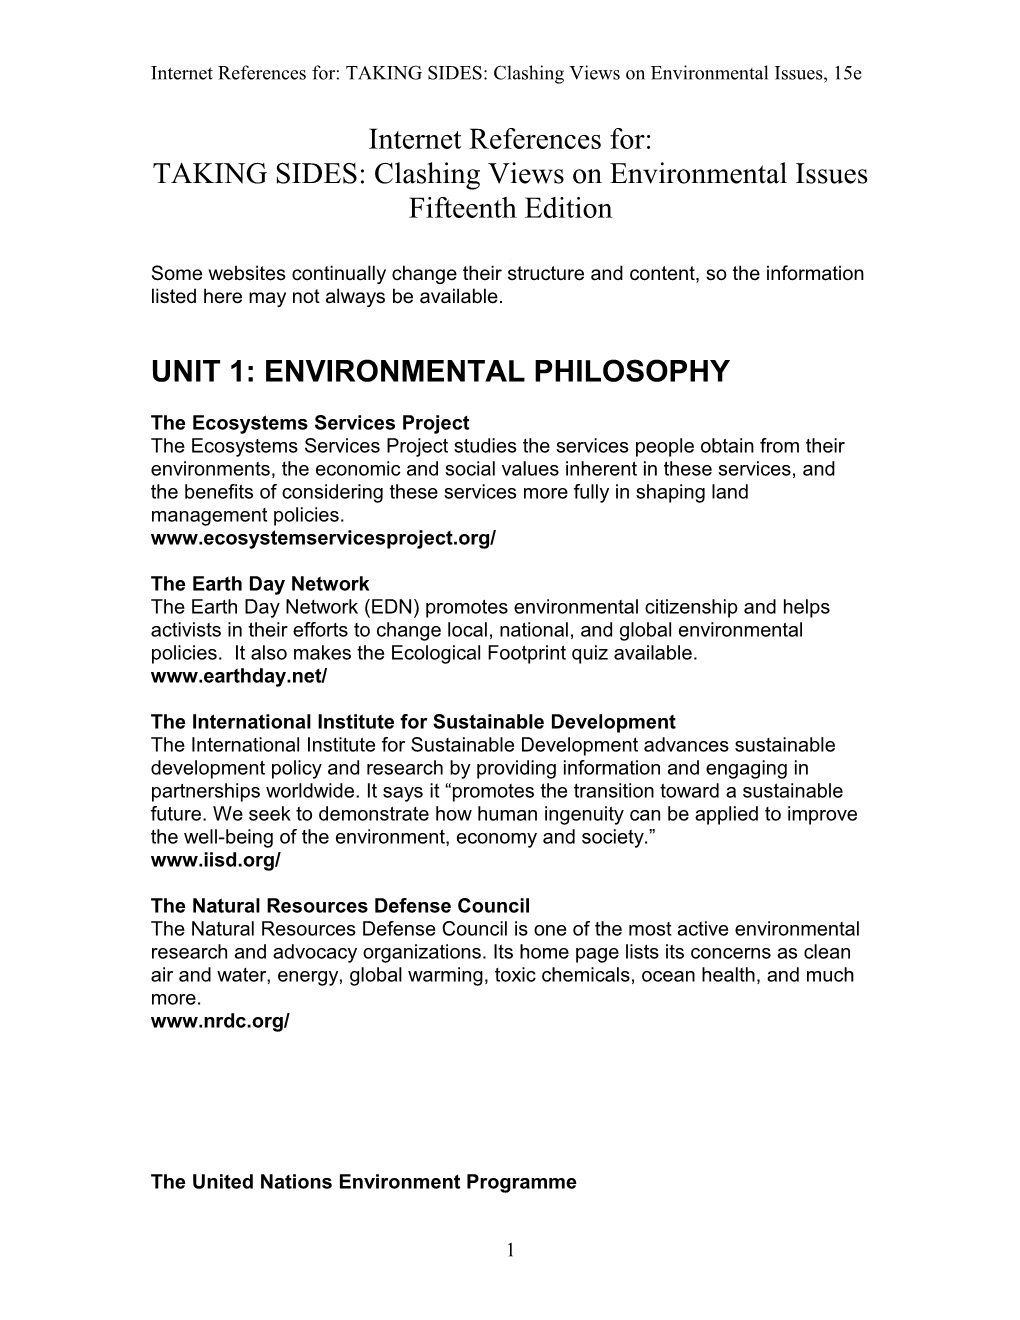 Internet References For: TAKING SIDES: Clashing Views on Environmental Issues, 15E